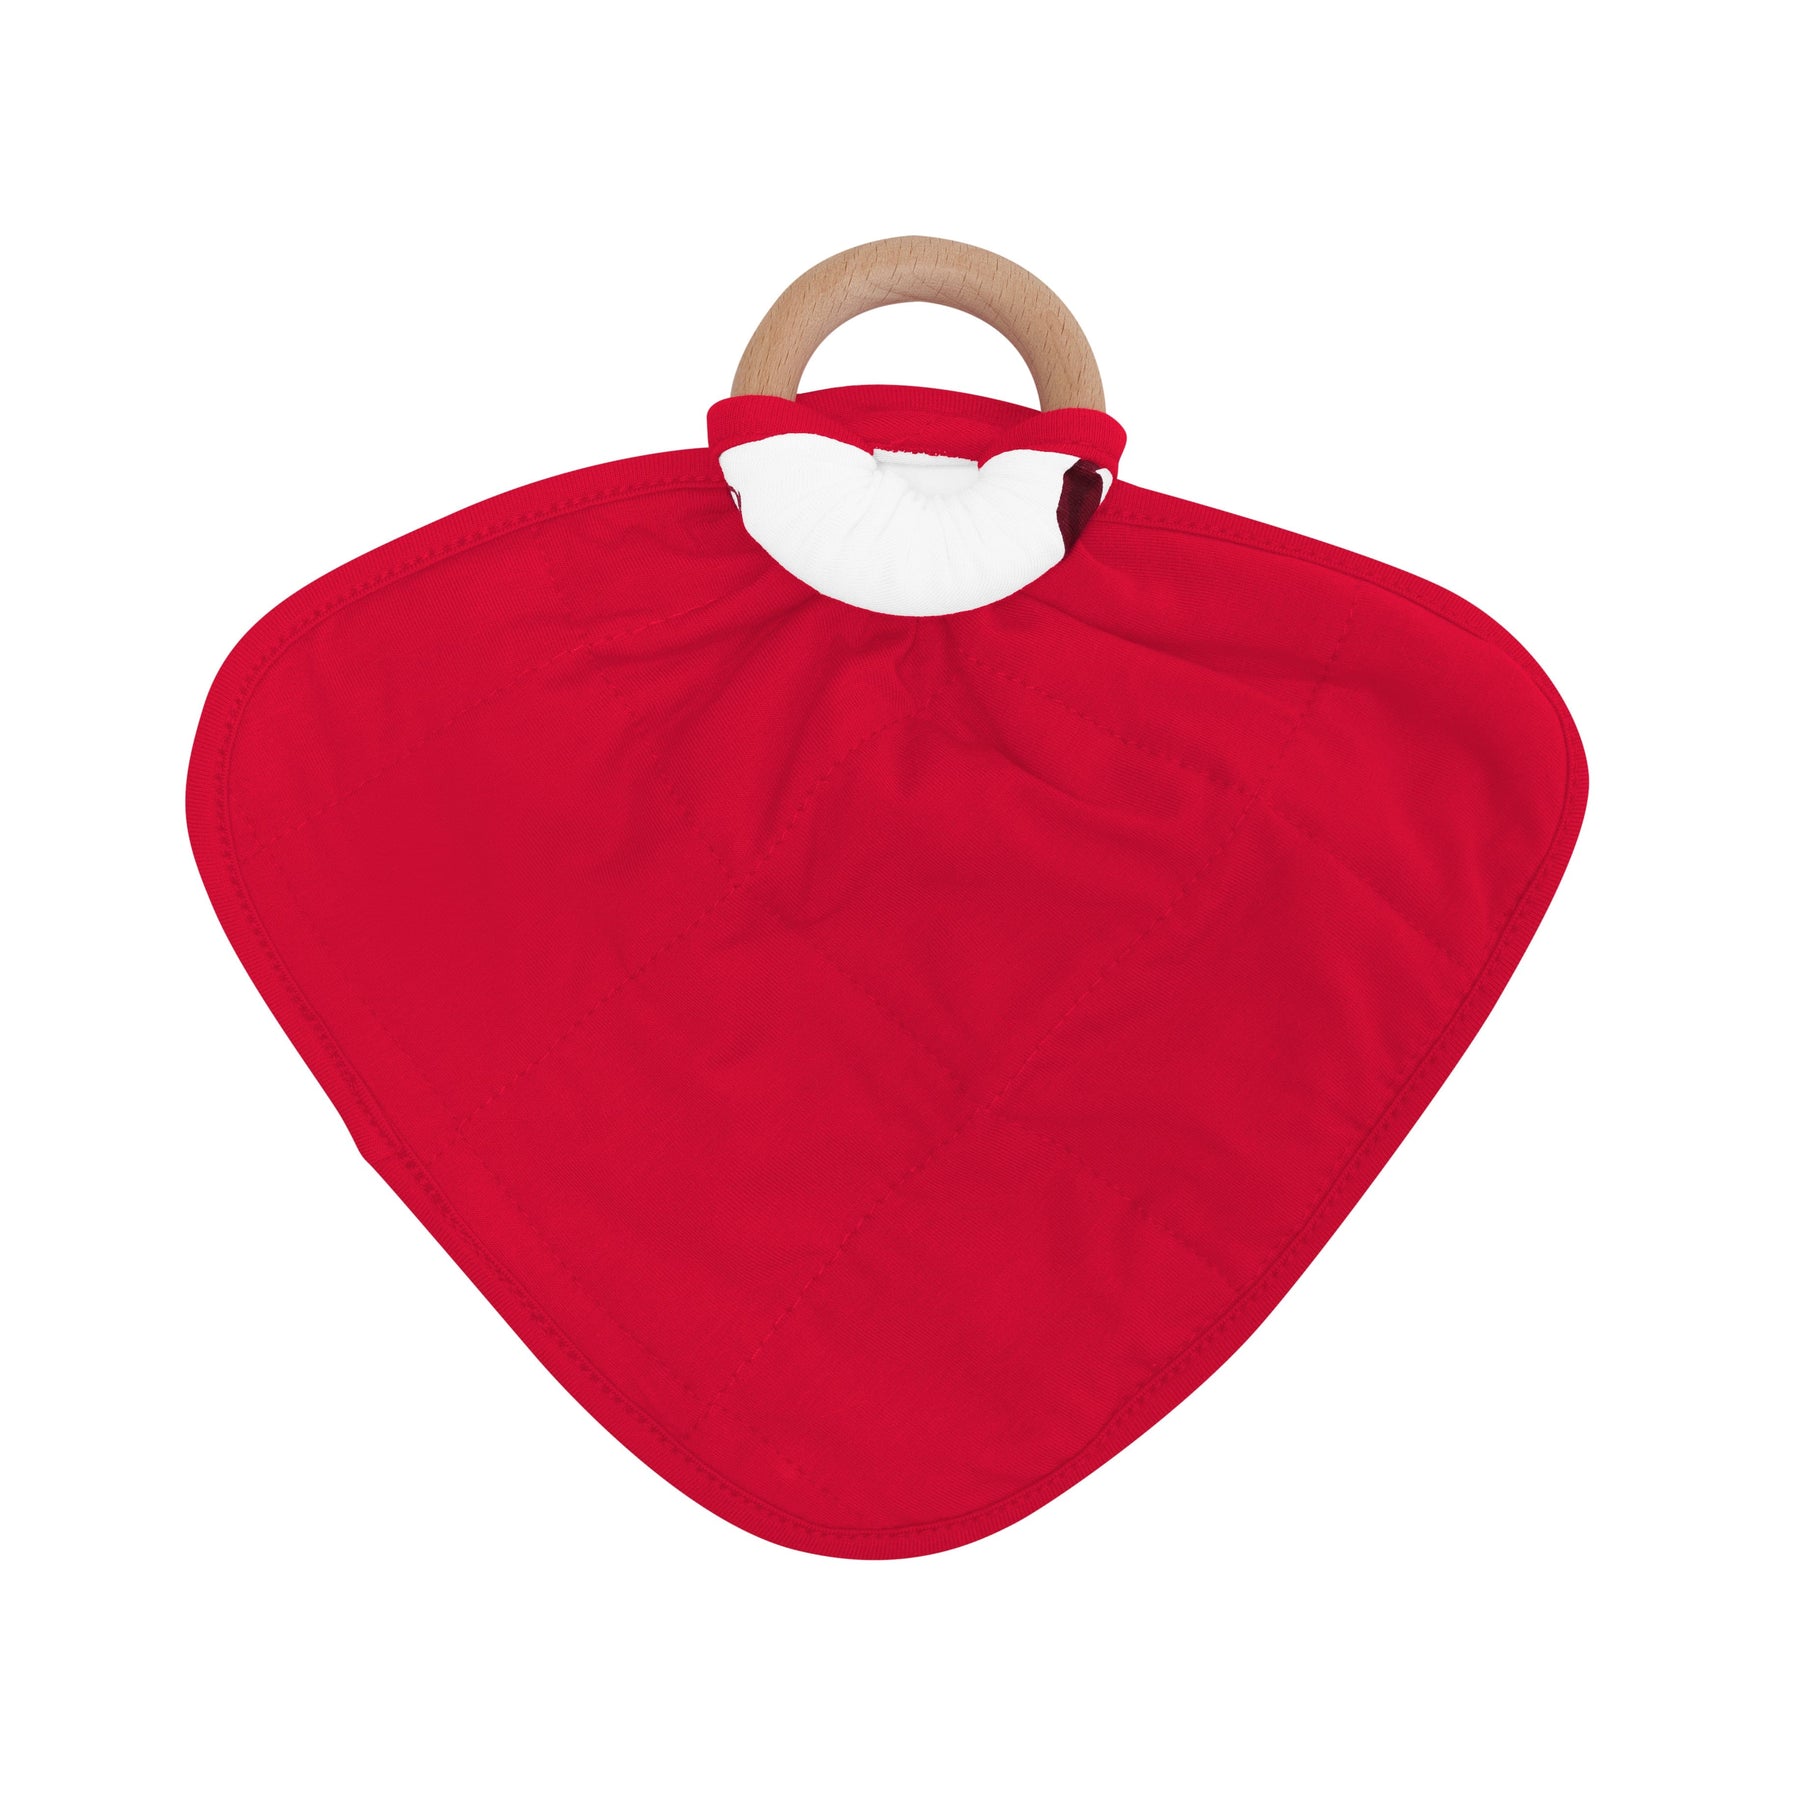 Kyte Baby Lovey Cherry / Infant Lovey in Cherry with Removable Teething Ring